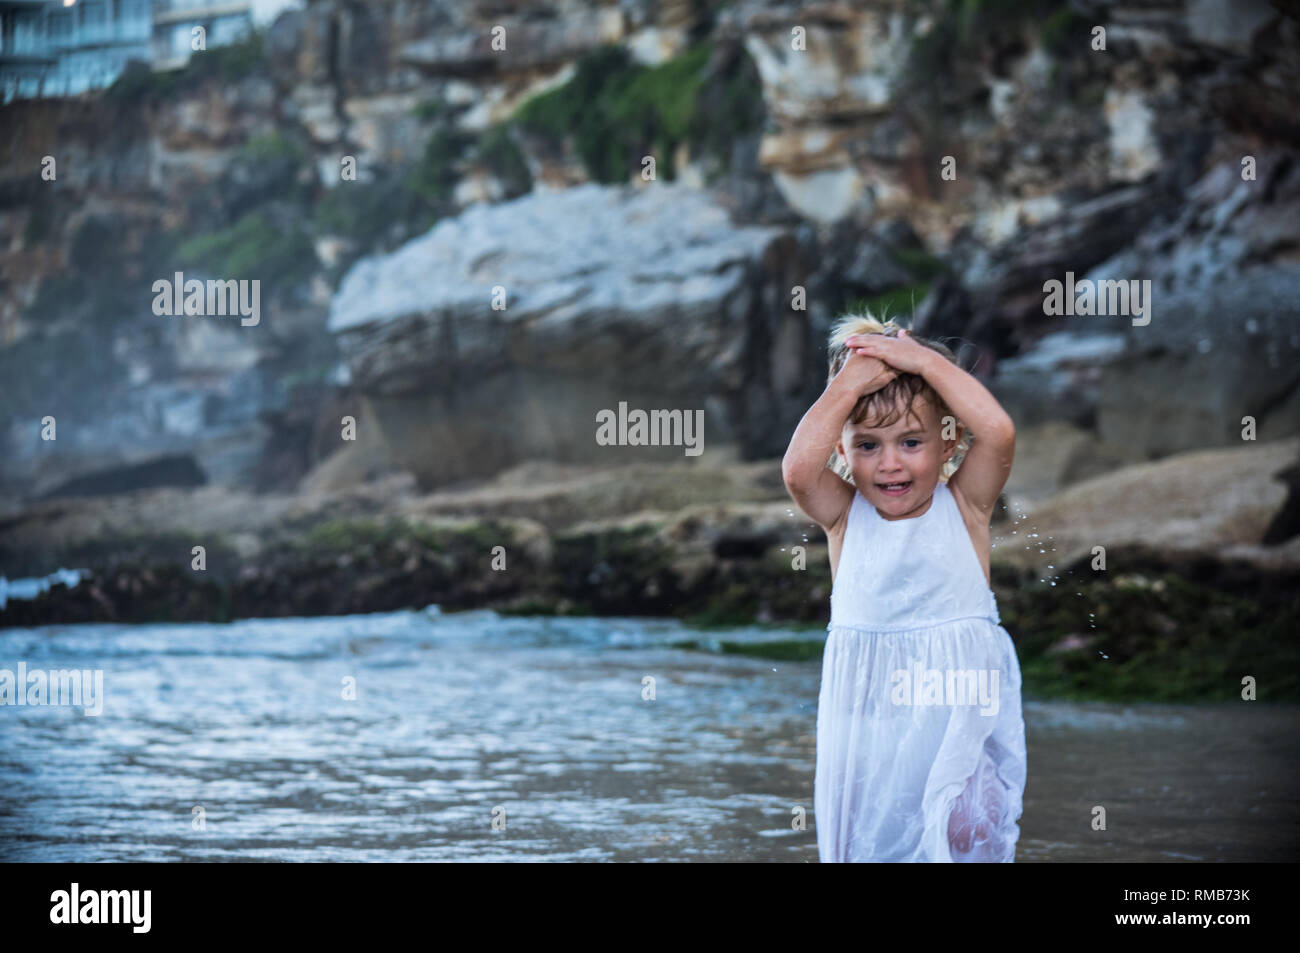 little blond baby girl wetting her hair and playing in the water of a beautiful empty beach with rocks Stock Photo